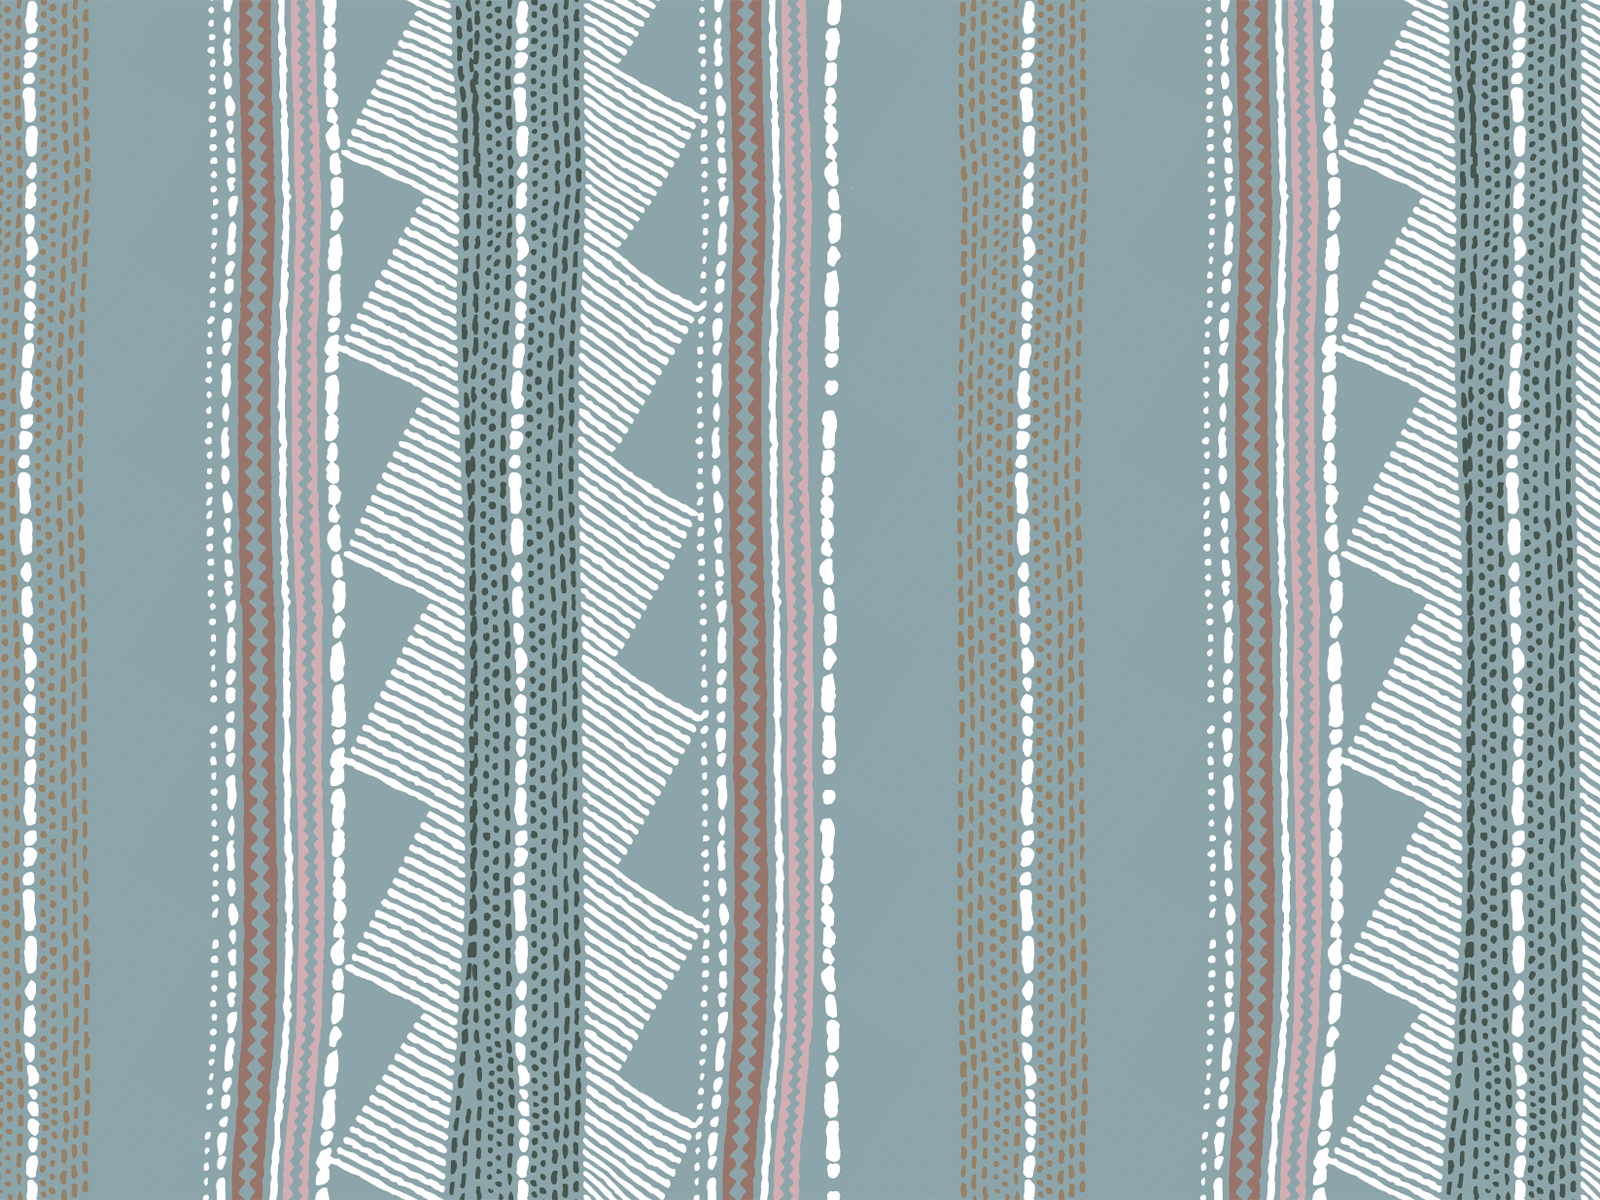 Pattern Designs for Sewing Studio